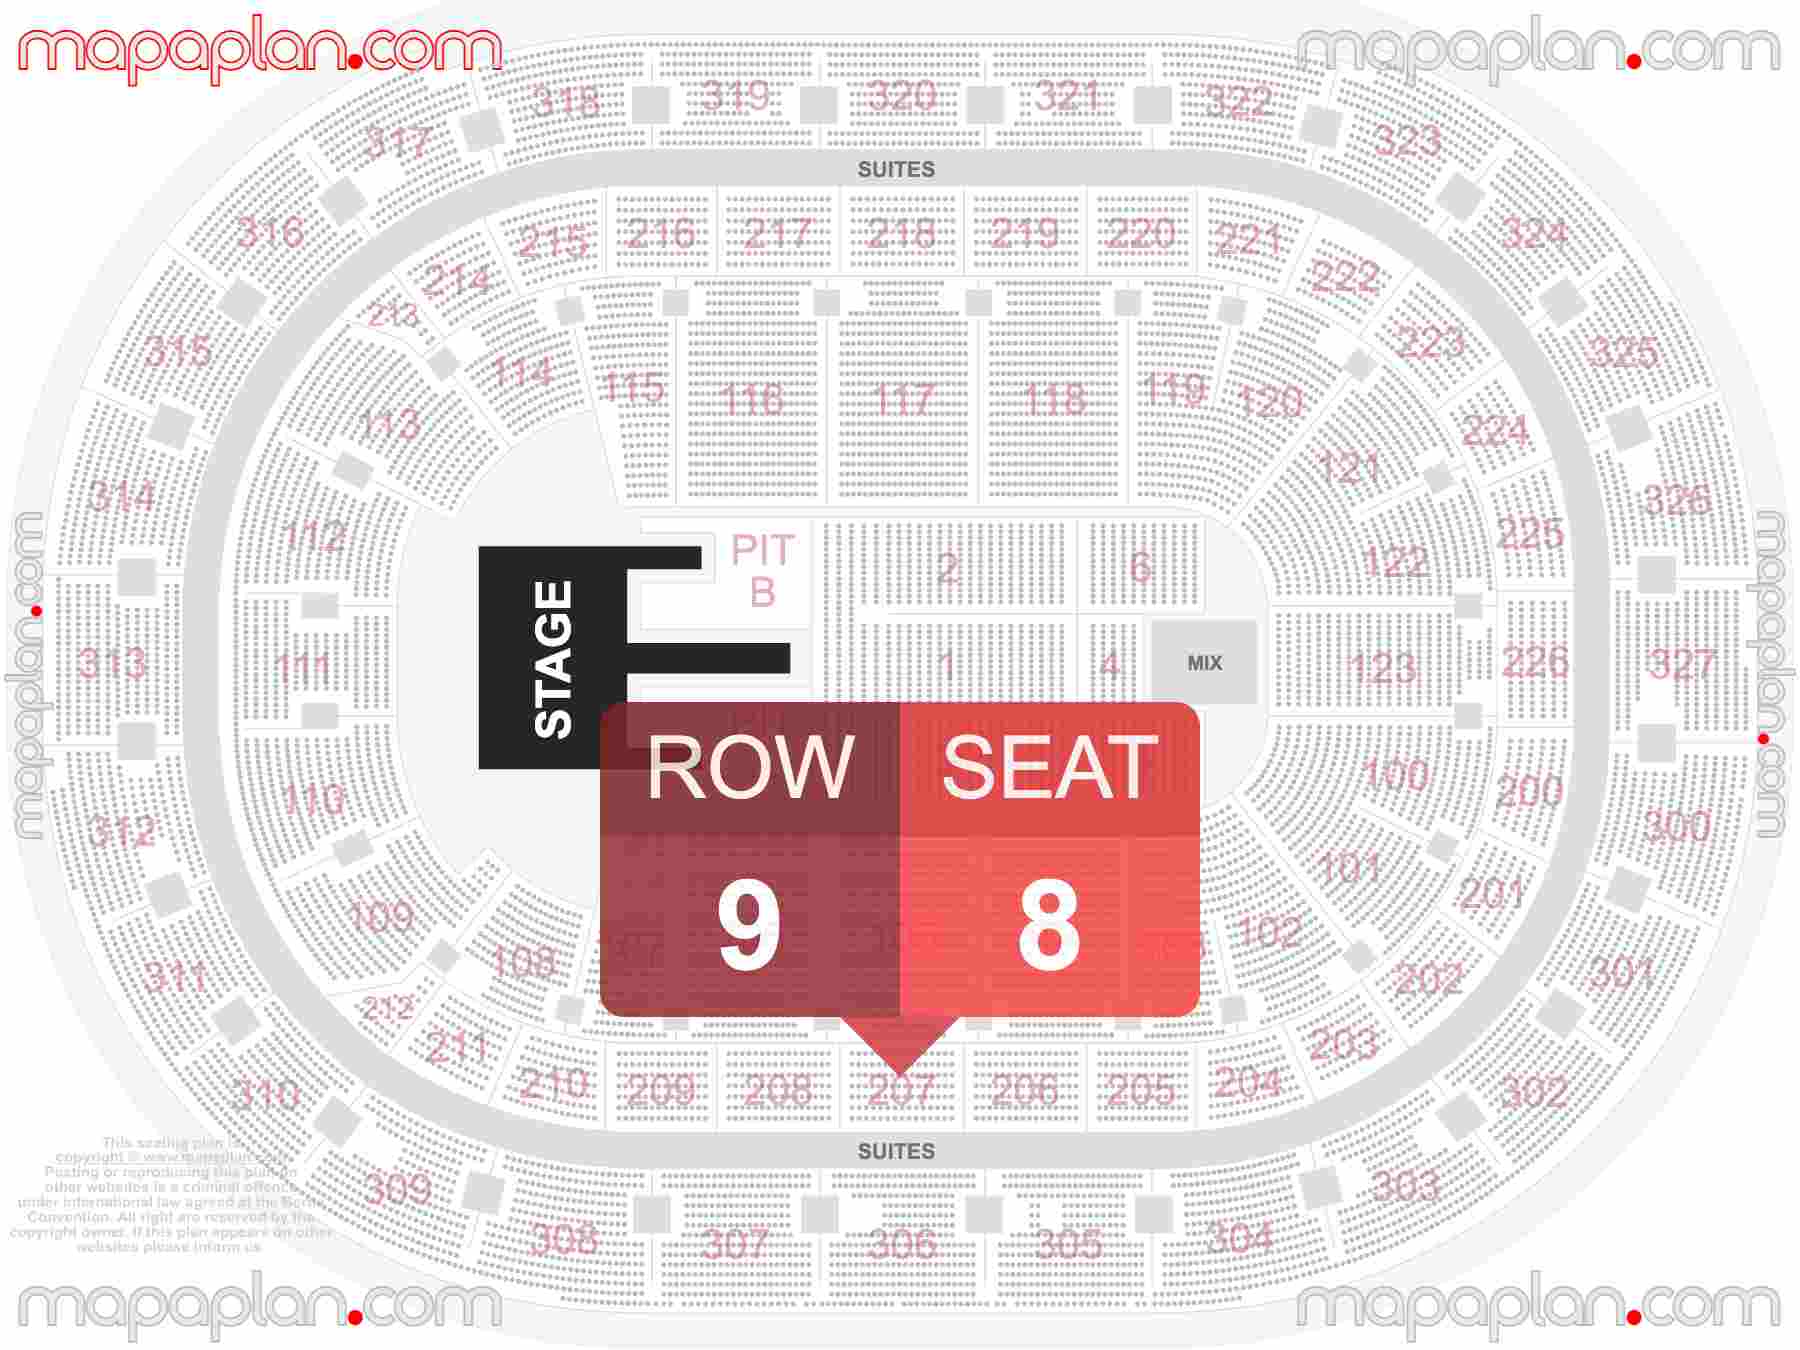 Buffalo KeyBank Center seating chart Concert with PIT floor standing interactive seating checker map plan showing seat numbers per row - Ticket prices sections review diagram